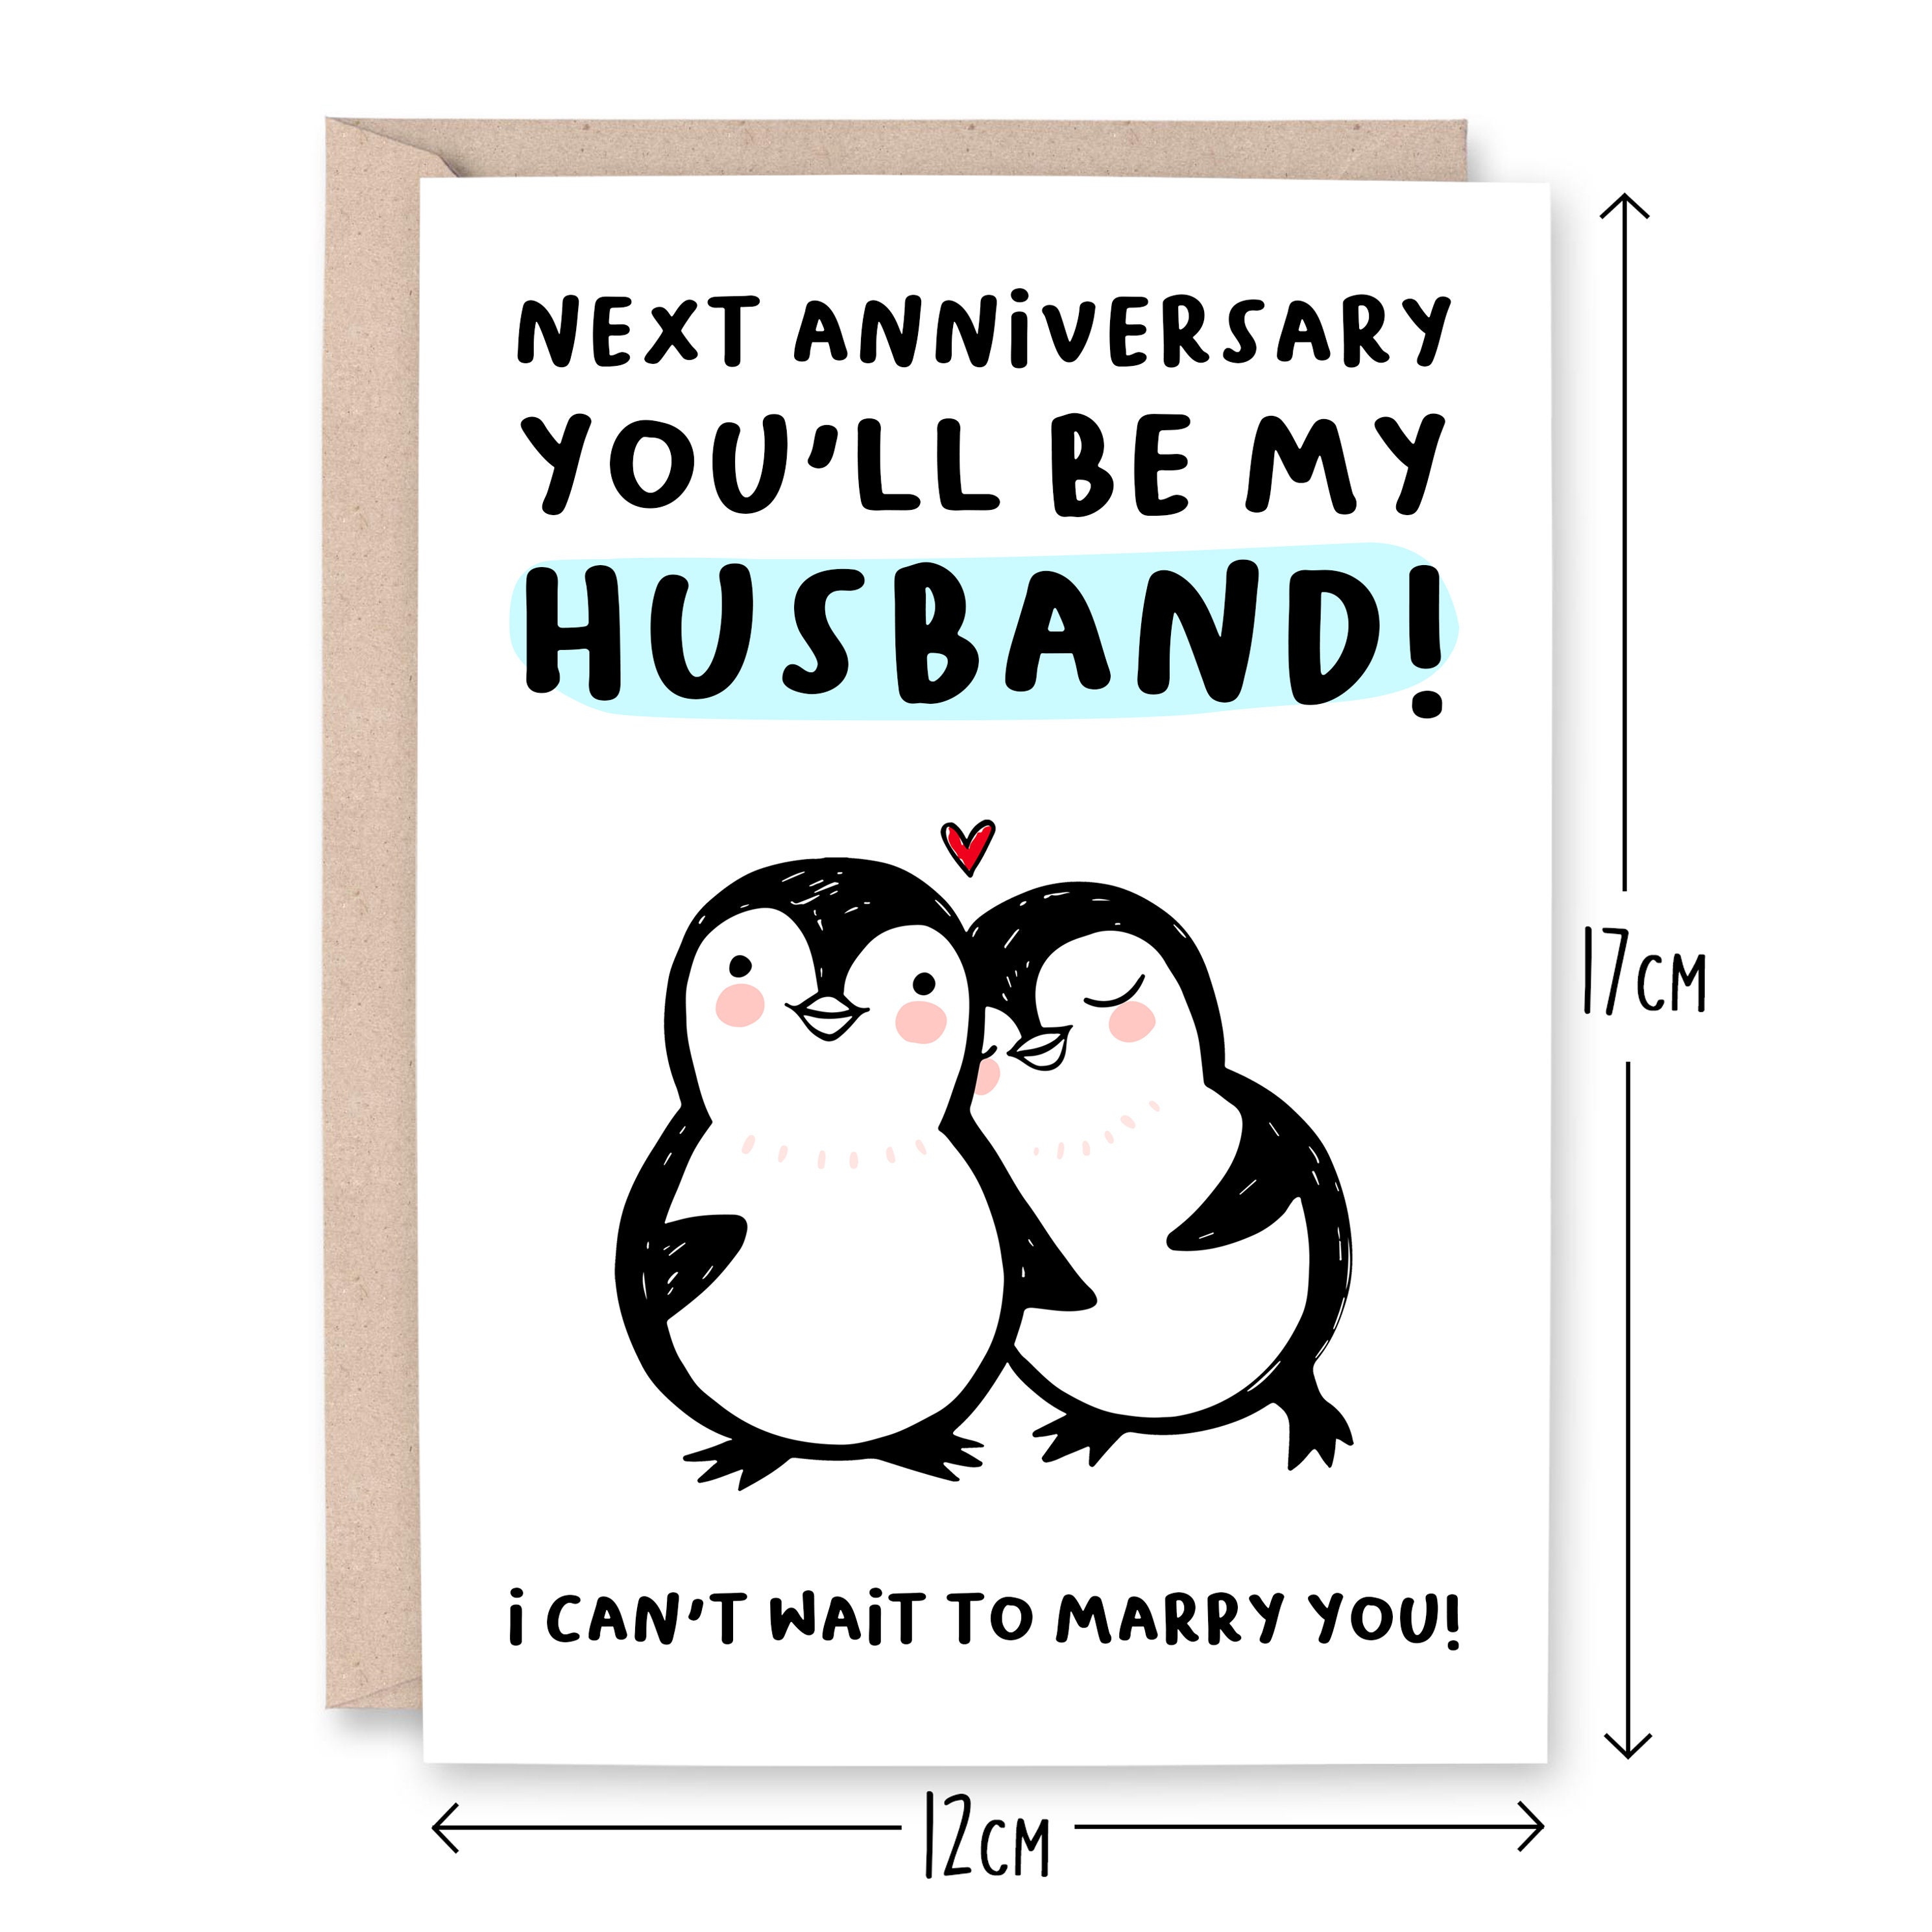 Next Anniversary Youll Be My Husband Card Last image pic